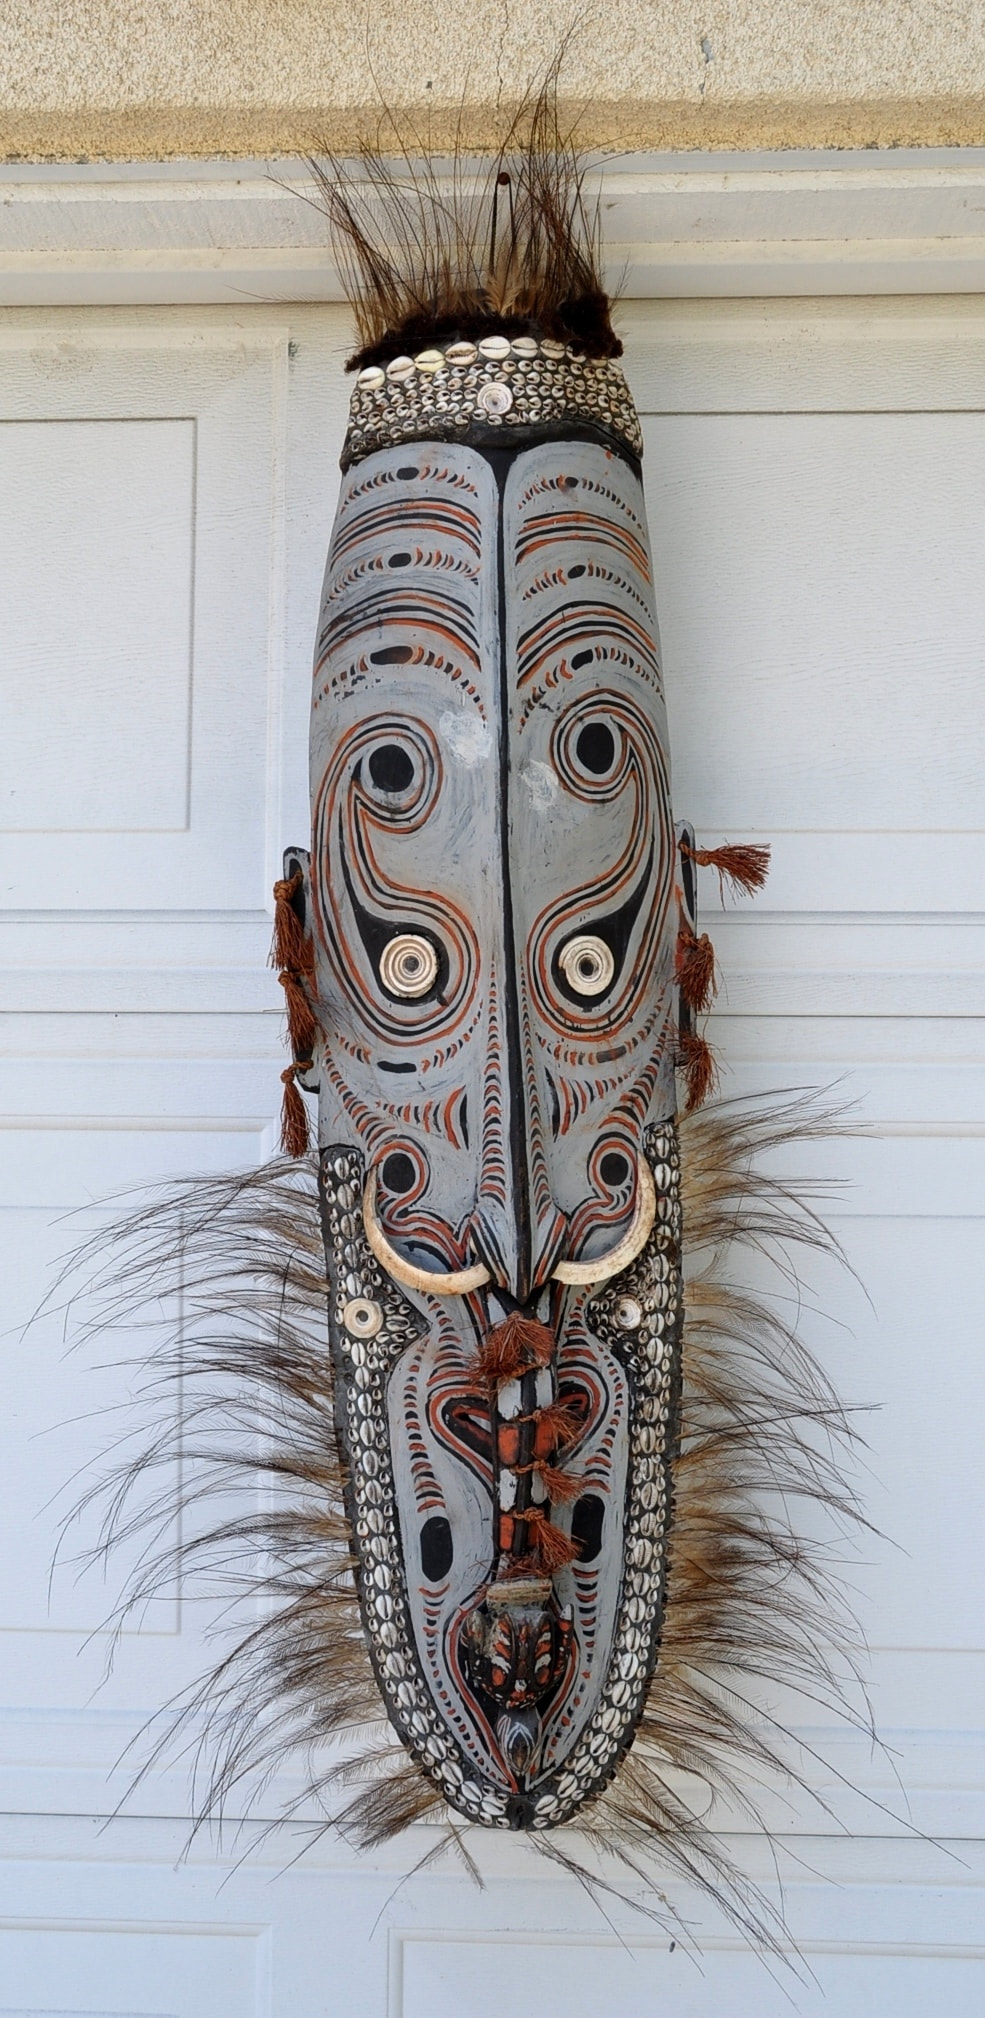 Papua New Guinea mask with cassowary feathers, cowrie shells and boar's tusks